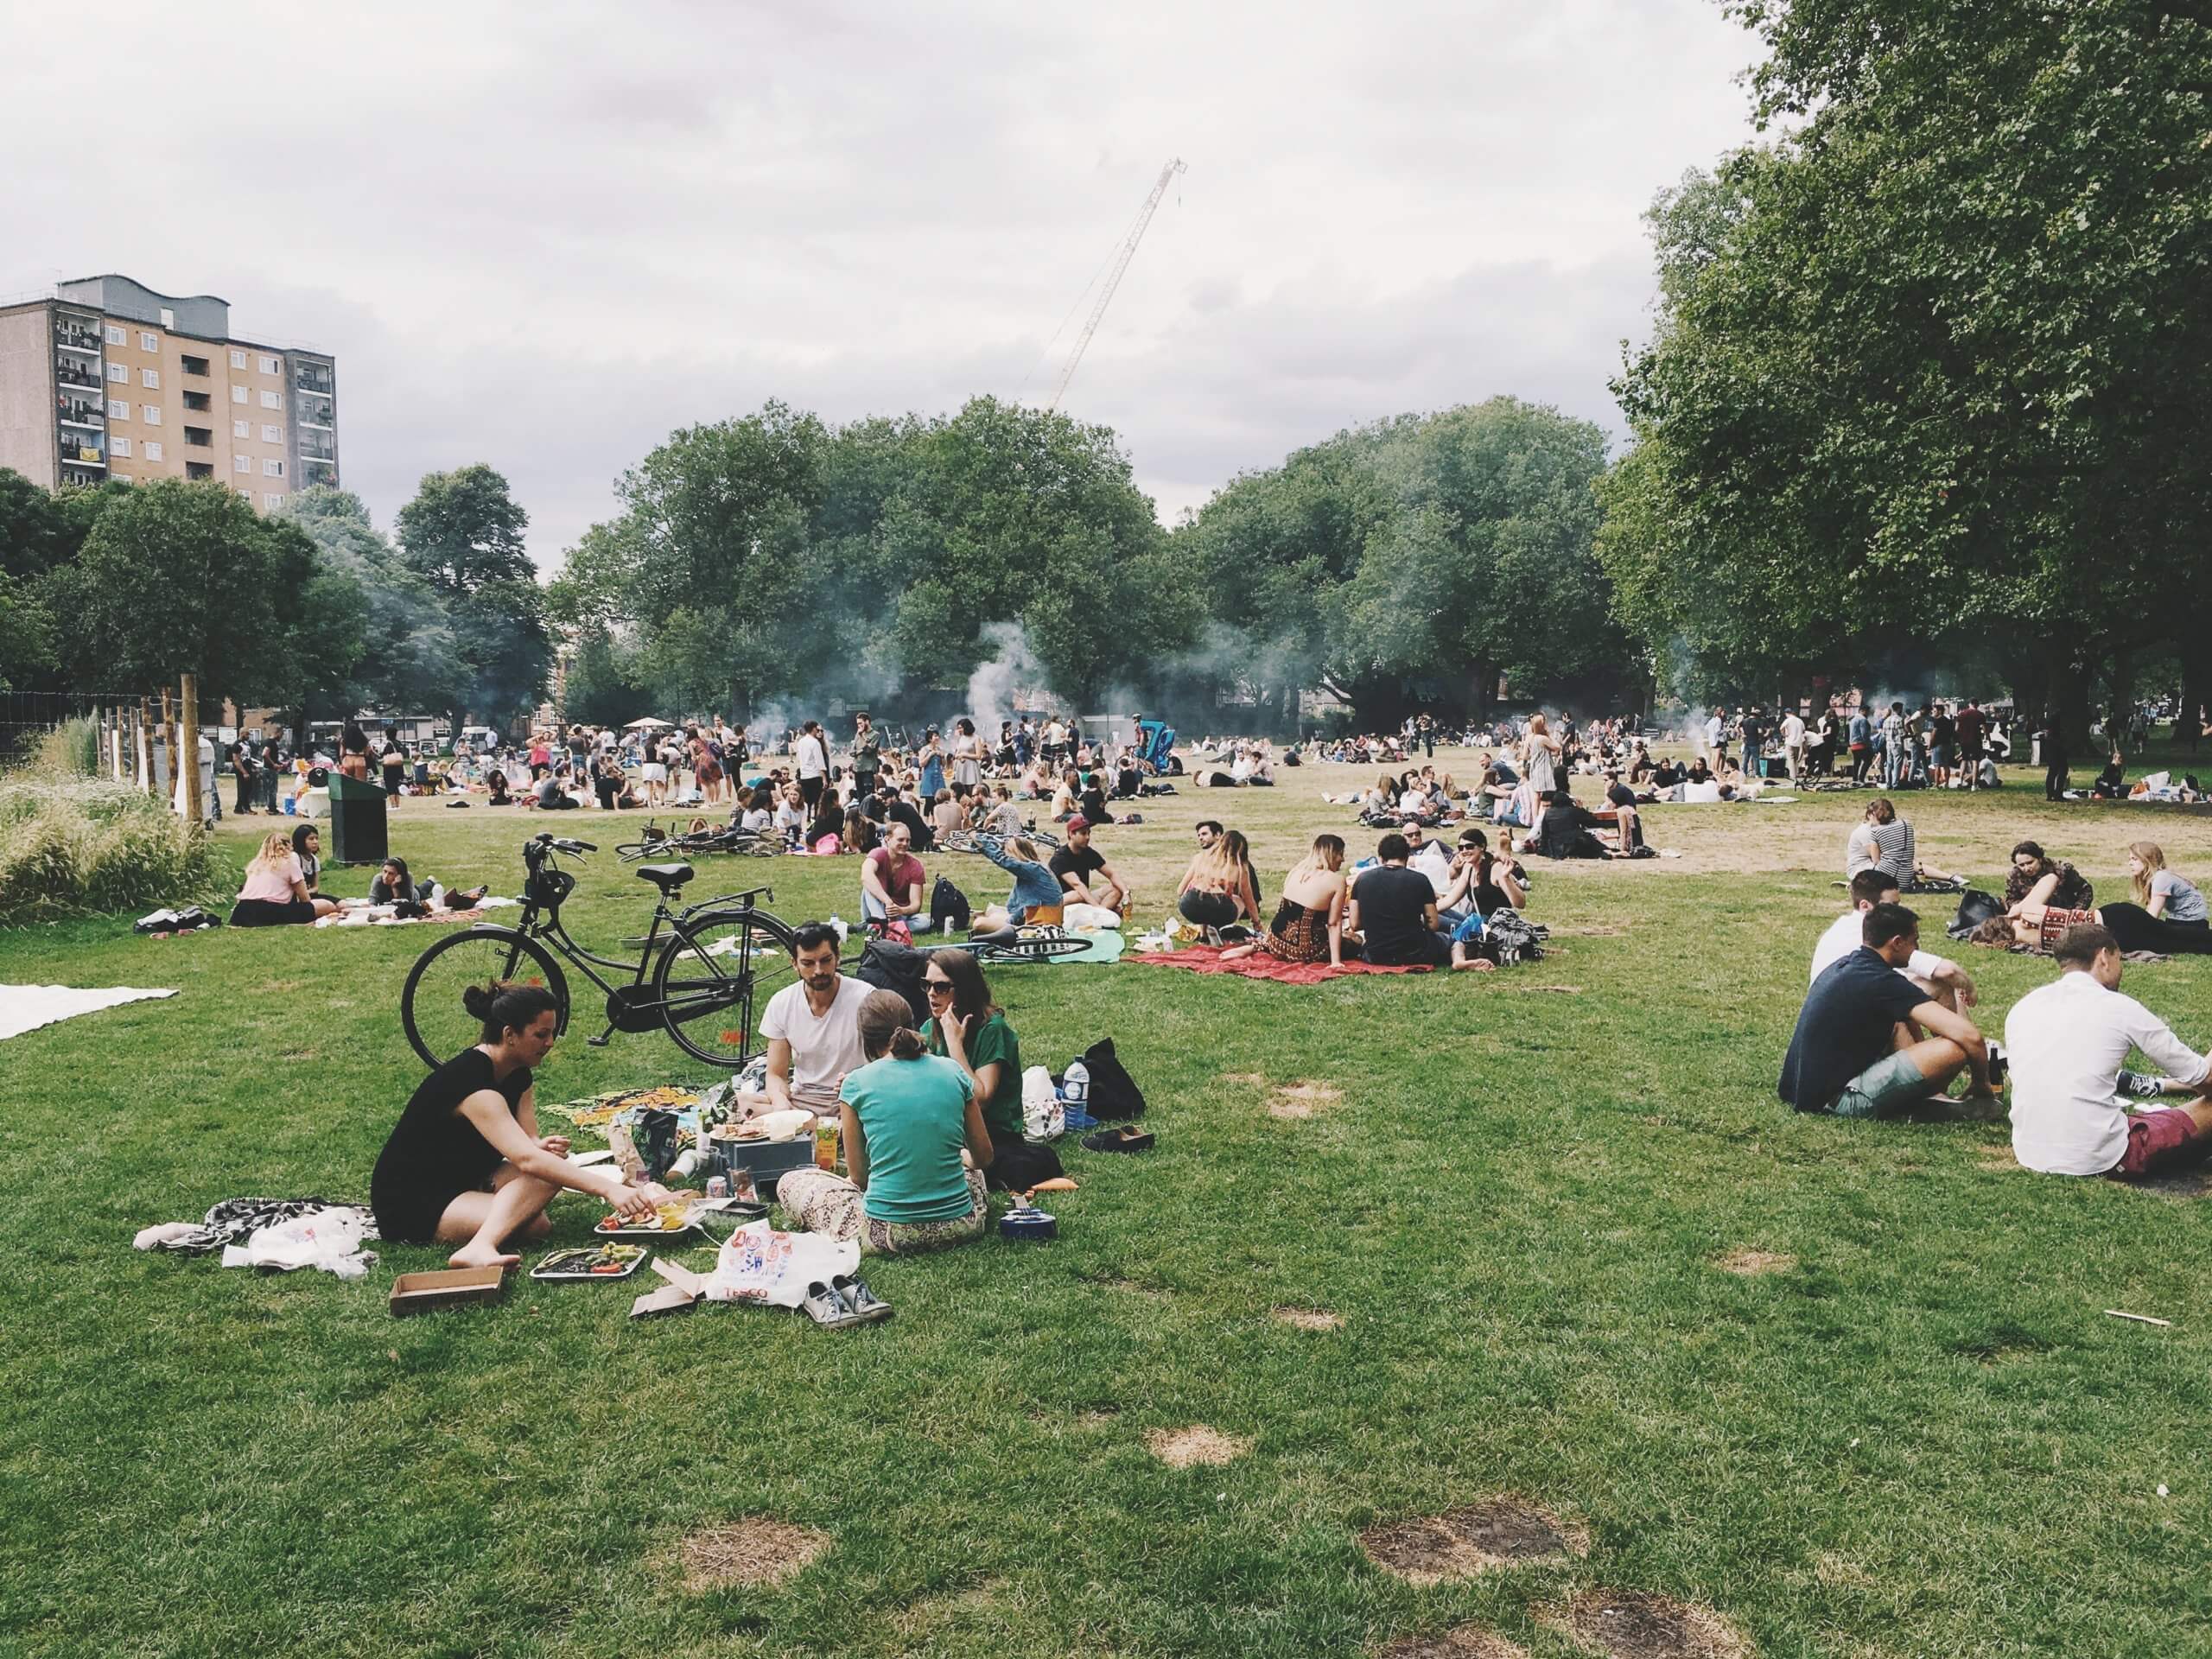 London Fields Park With People